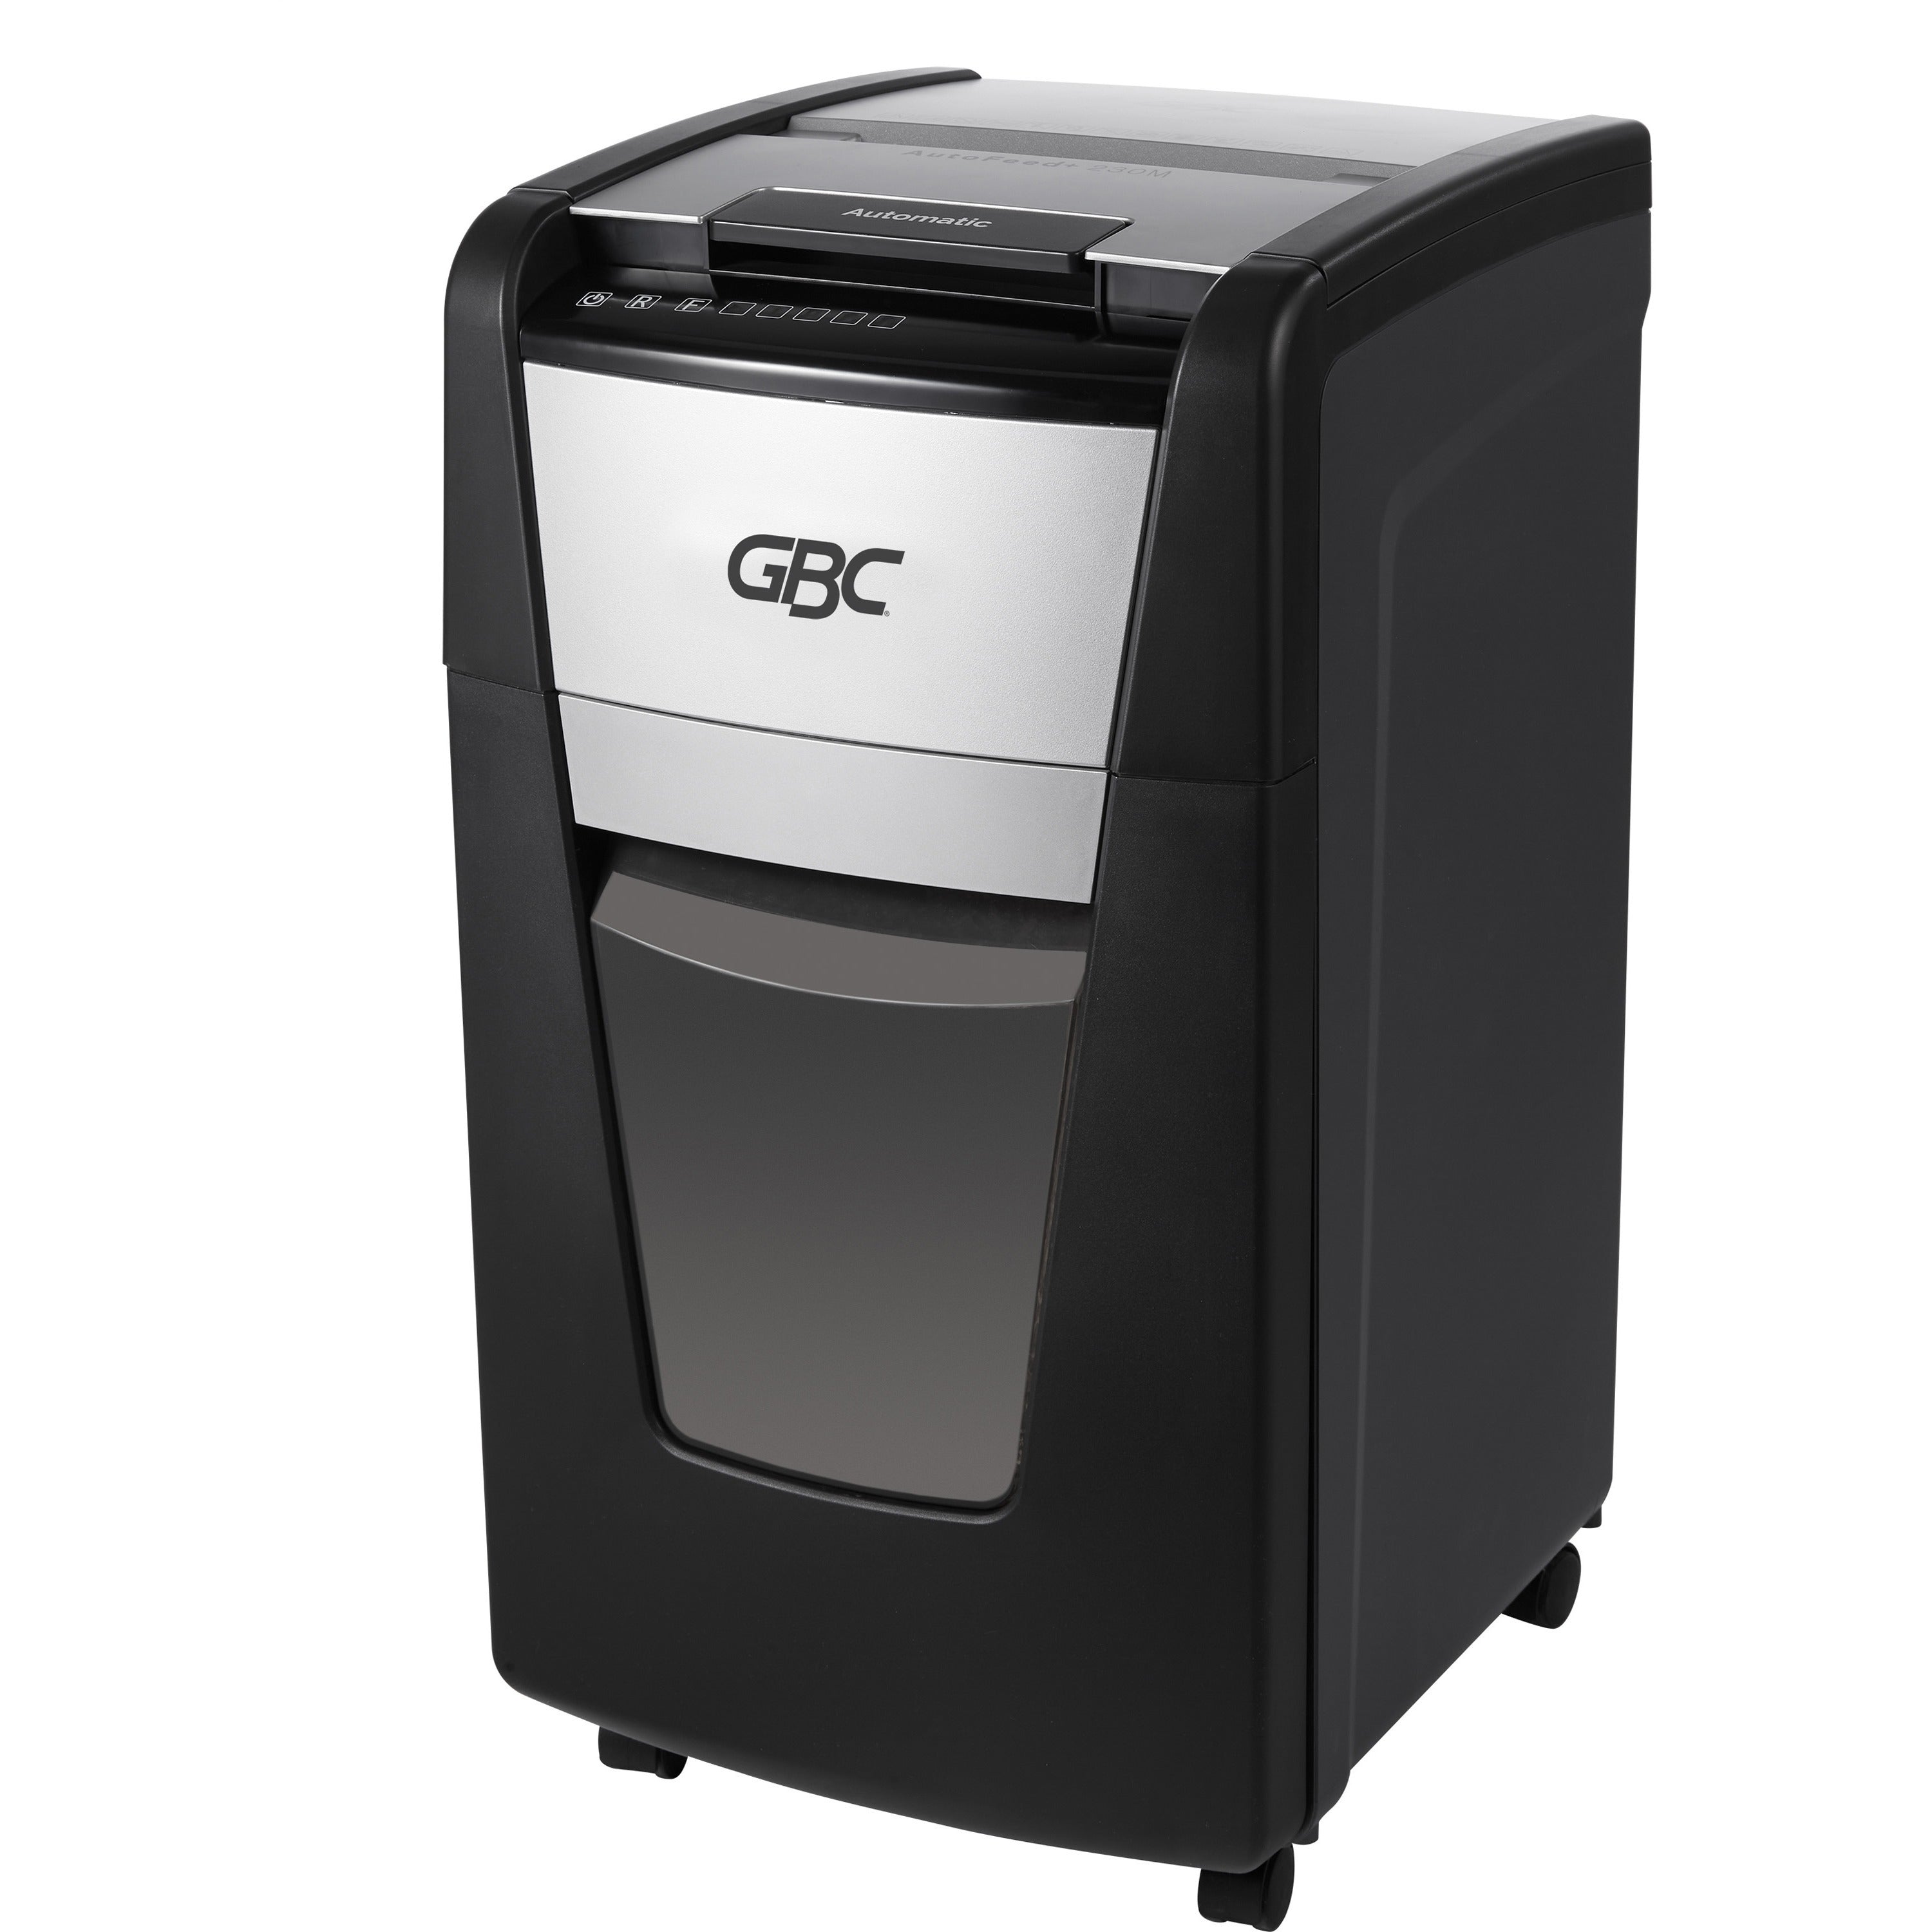 gbc-autofeed+-small-office-shredder-230m-micro-cut-230-sheets-continuous-shredder-micro-cut-8-per-pass-for-shredding-credit-card-paper-clip-staples-paper-p-5-30-minute-run-time-16-gal-wastebin-capacity-black_gbcwsm1757607 - 3